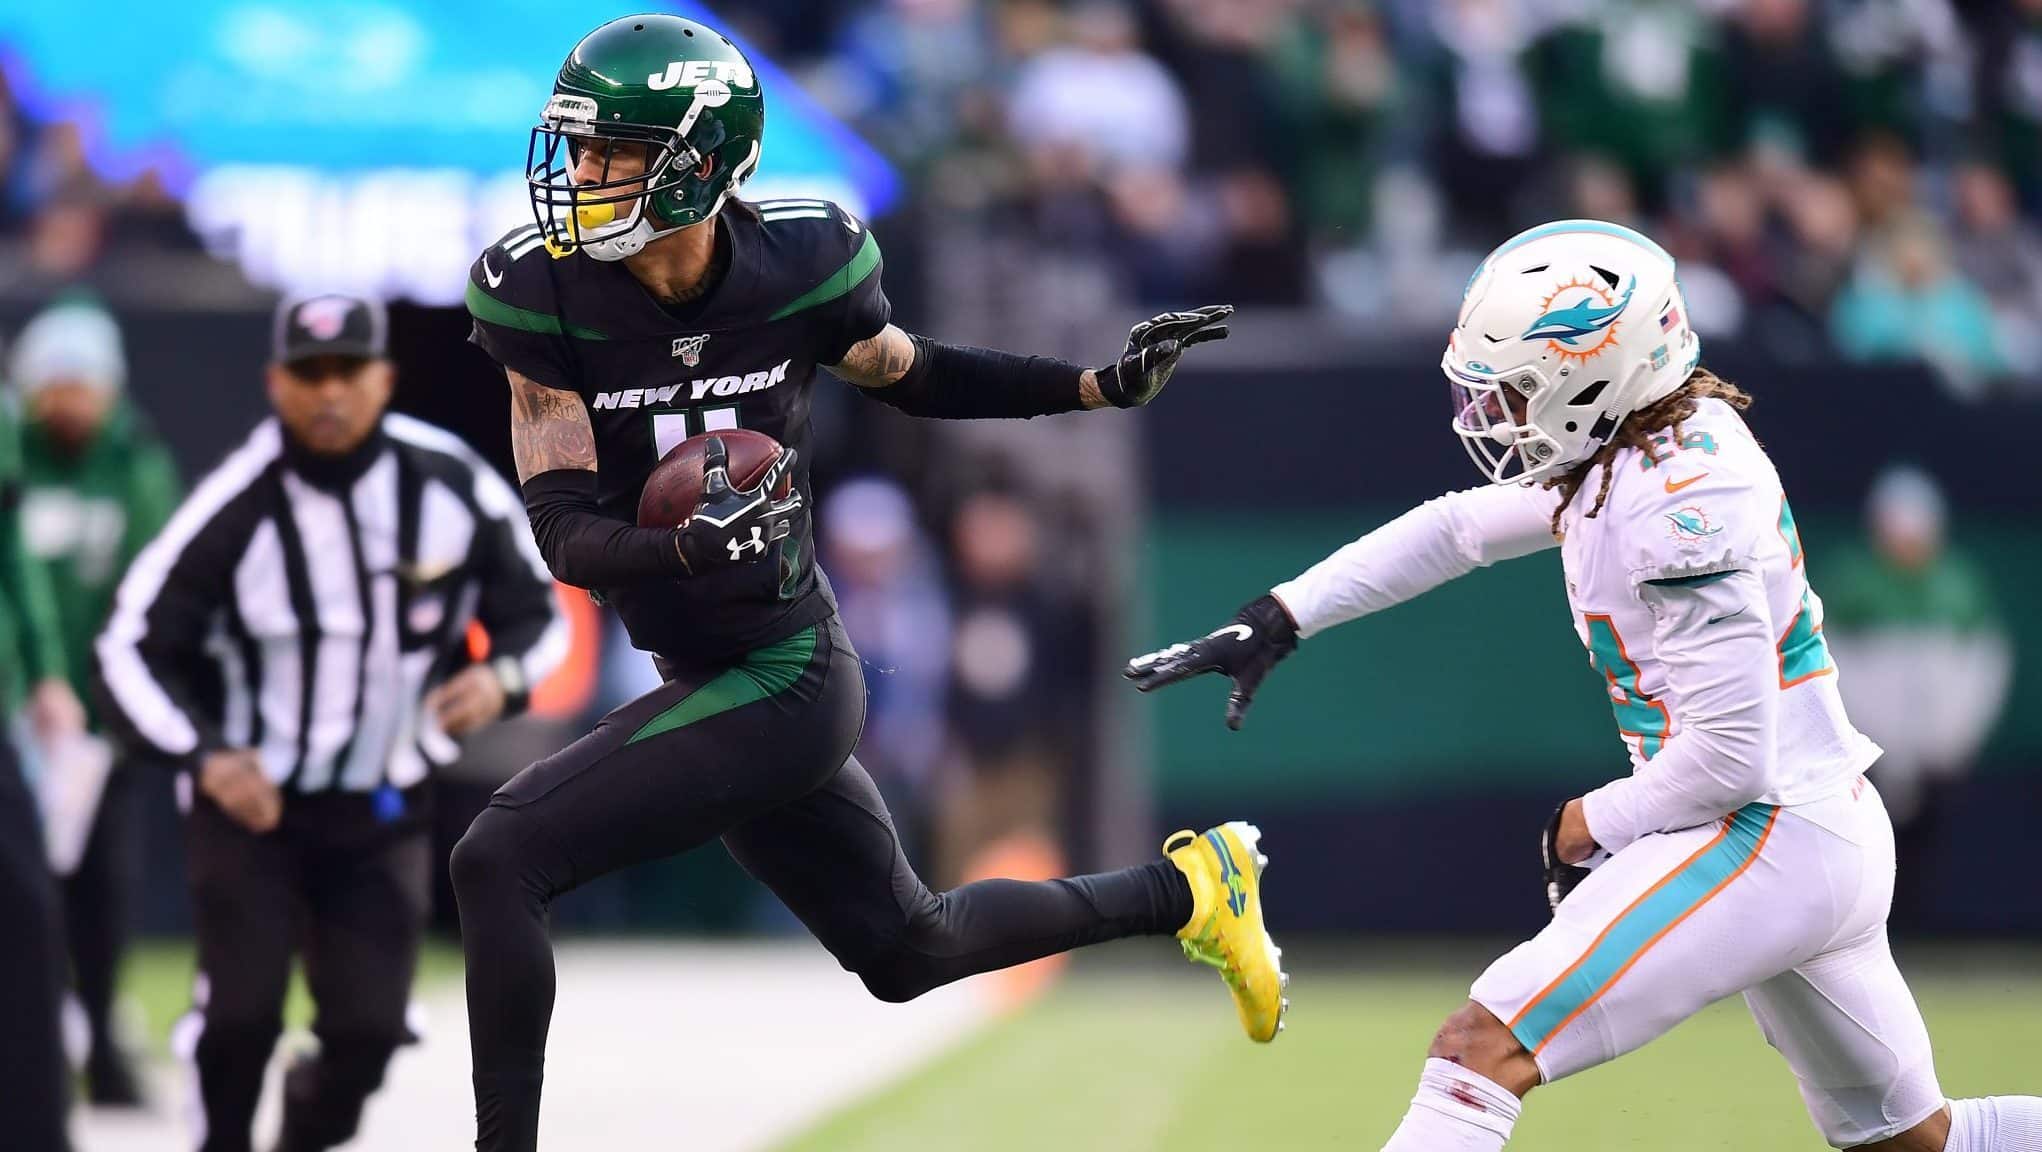 EAST RUTHERFORD, NEW JERSEY - DECEMBER 08: Robby Anderson #11 of the New York Jets is pushed out of bounds by Ryan Lewis #24 of the Miami Dolphins after completing a pass in the second half of their game at MetLife Stadium on December 08, 2019 in East Rutherford, New Jersey.